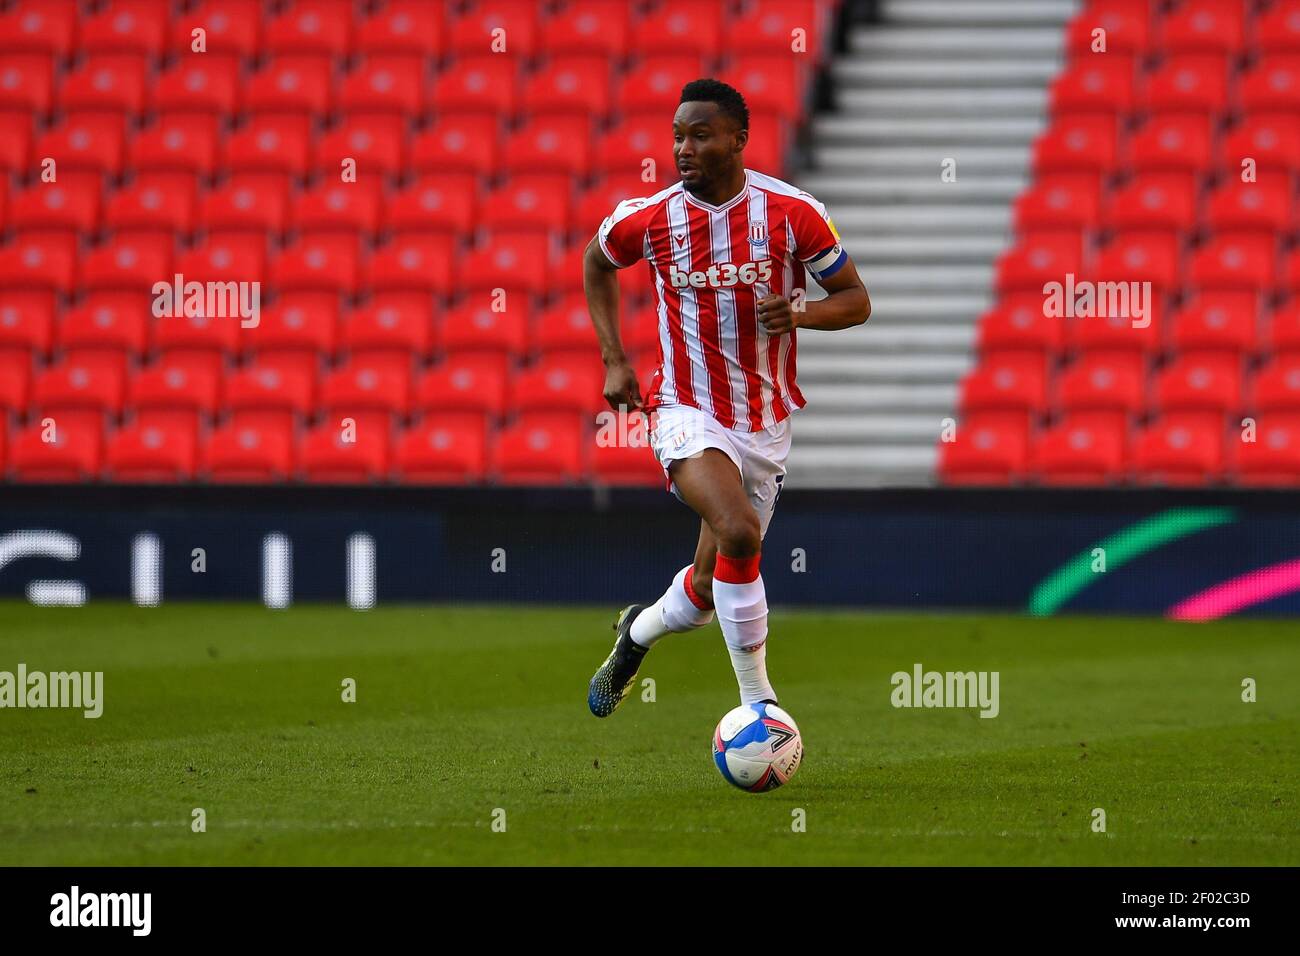 Mikel John Obi #13 of Stoke City in action during the game in, on 3/6/2021. (Photo by Craig Thomas/News Images/Sipa USA) Credit: Sipa USA/Alamy Live News Stock Photo